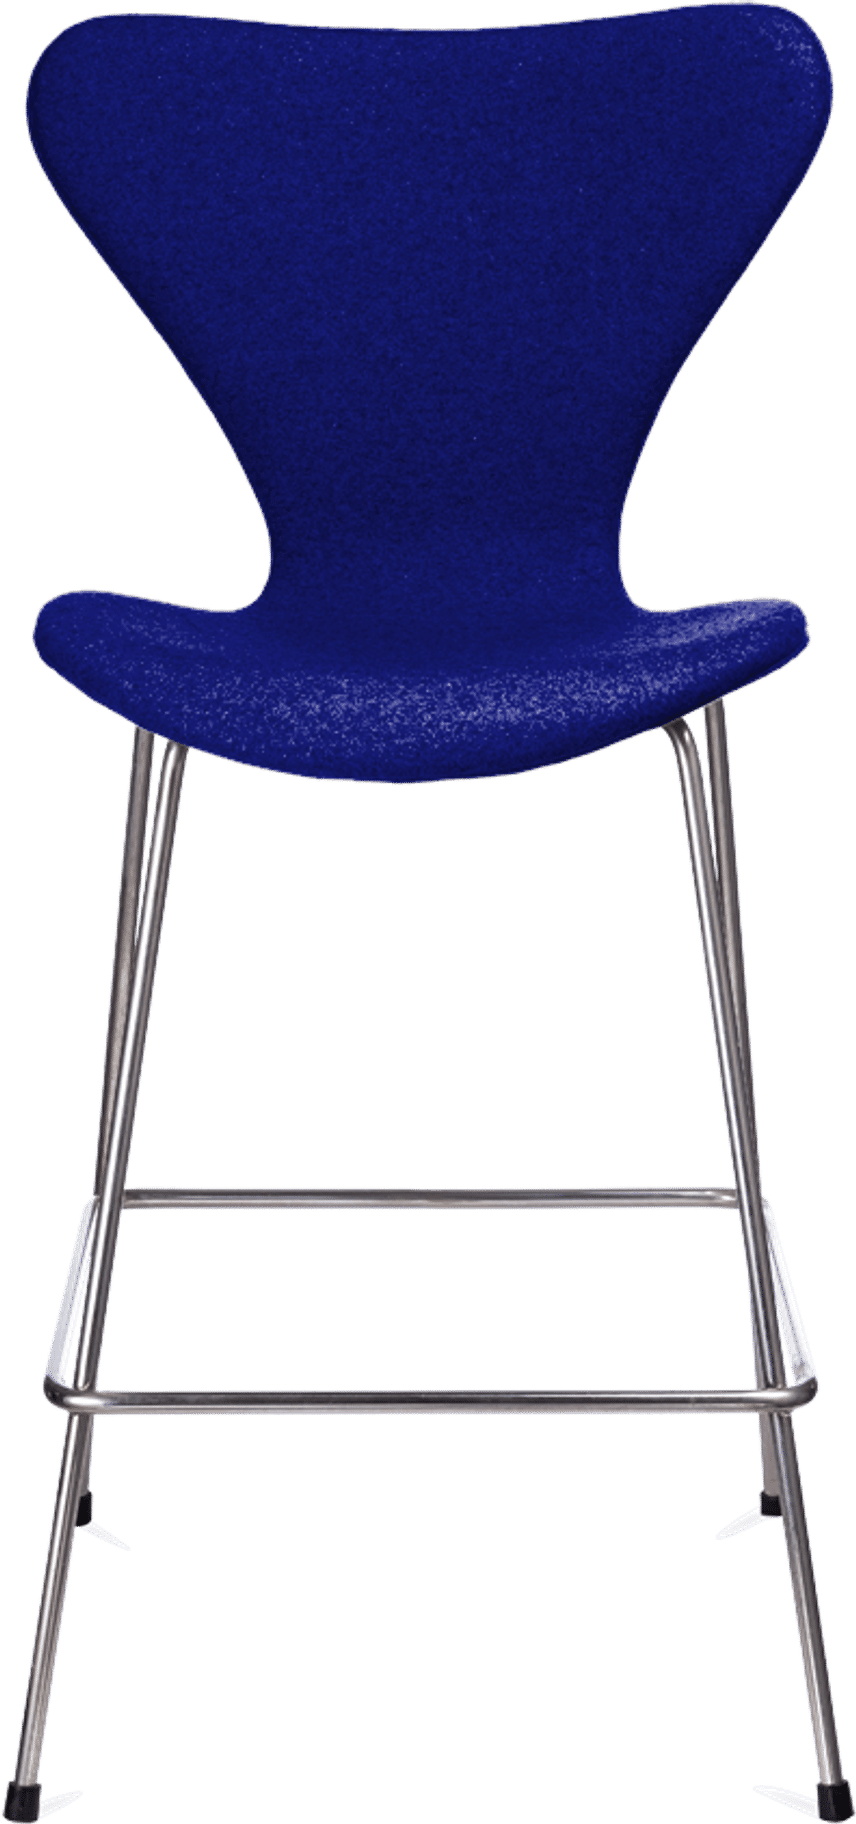 Series 7 Counter Stool Upholstered Blue image.